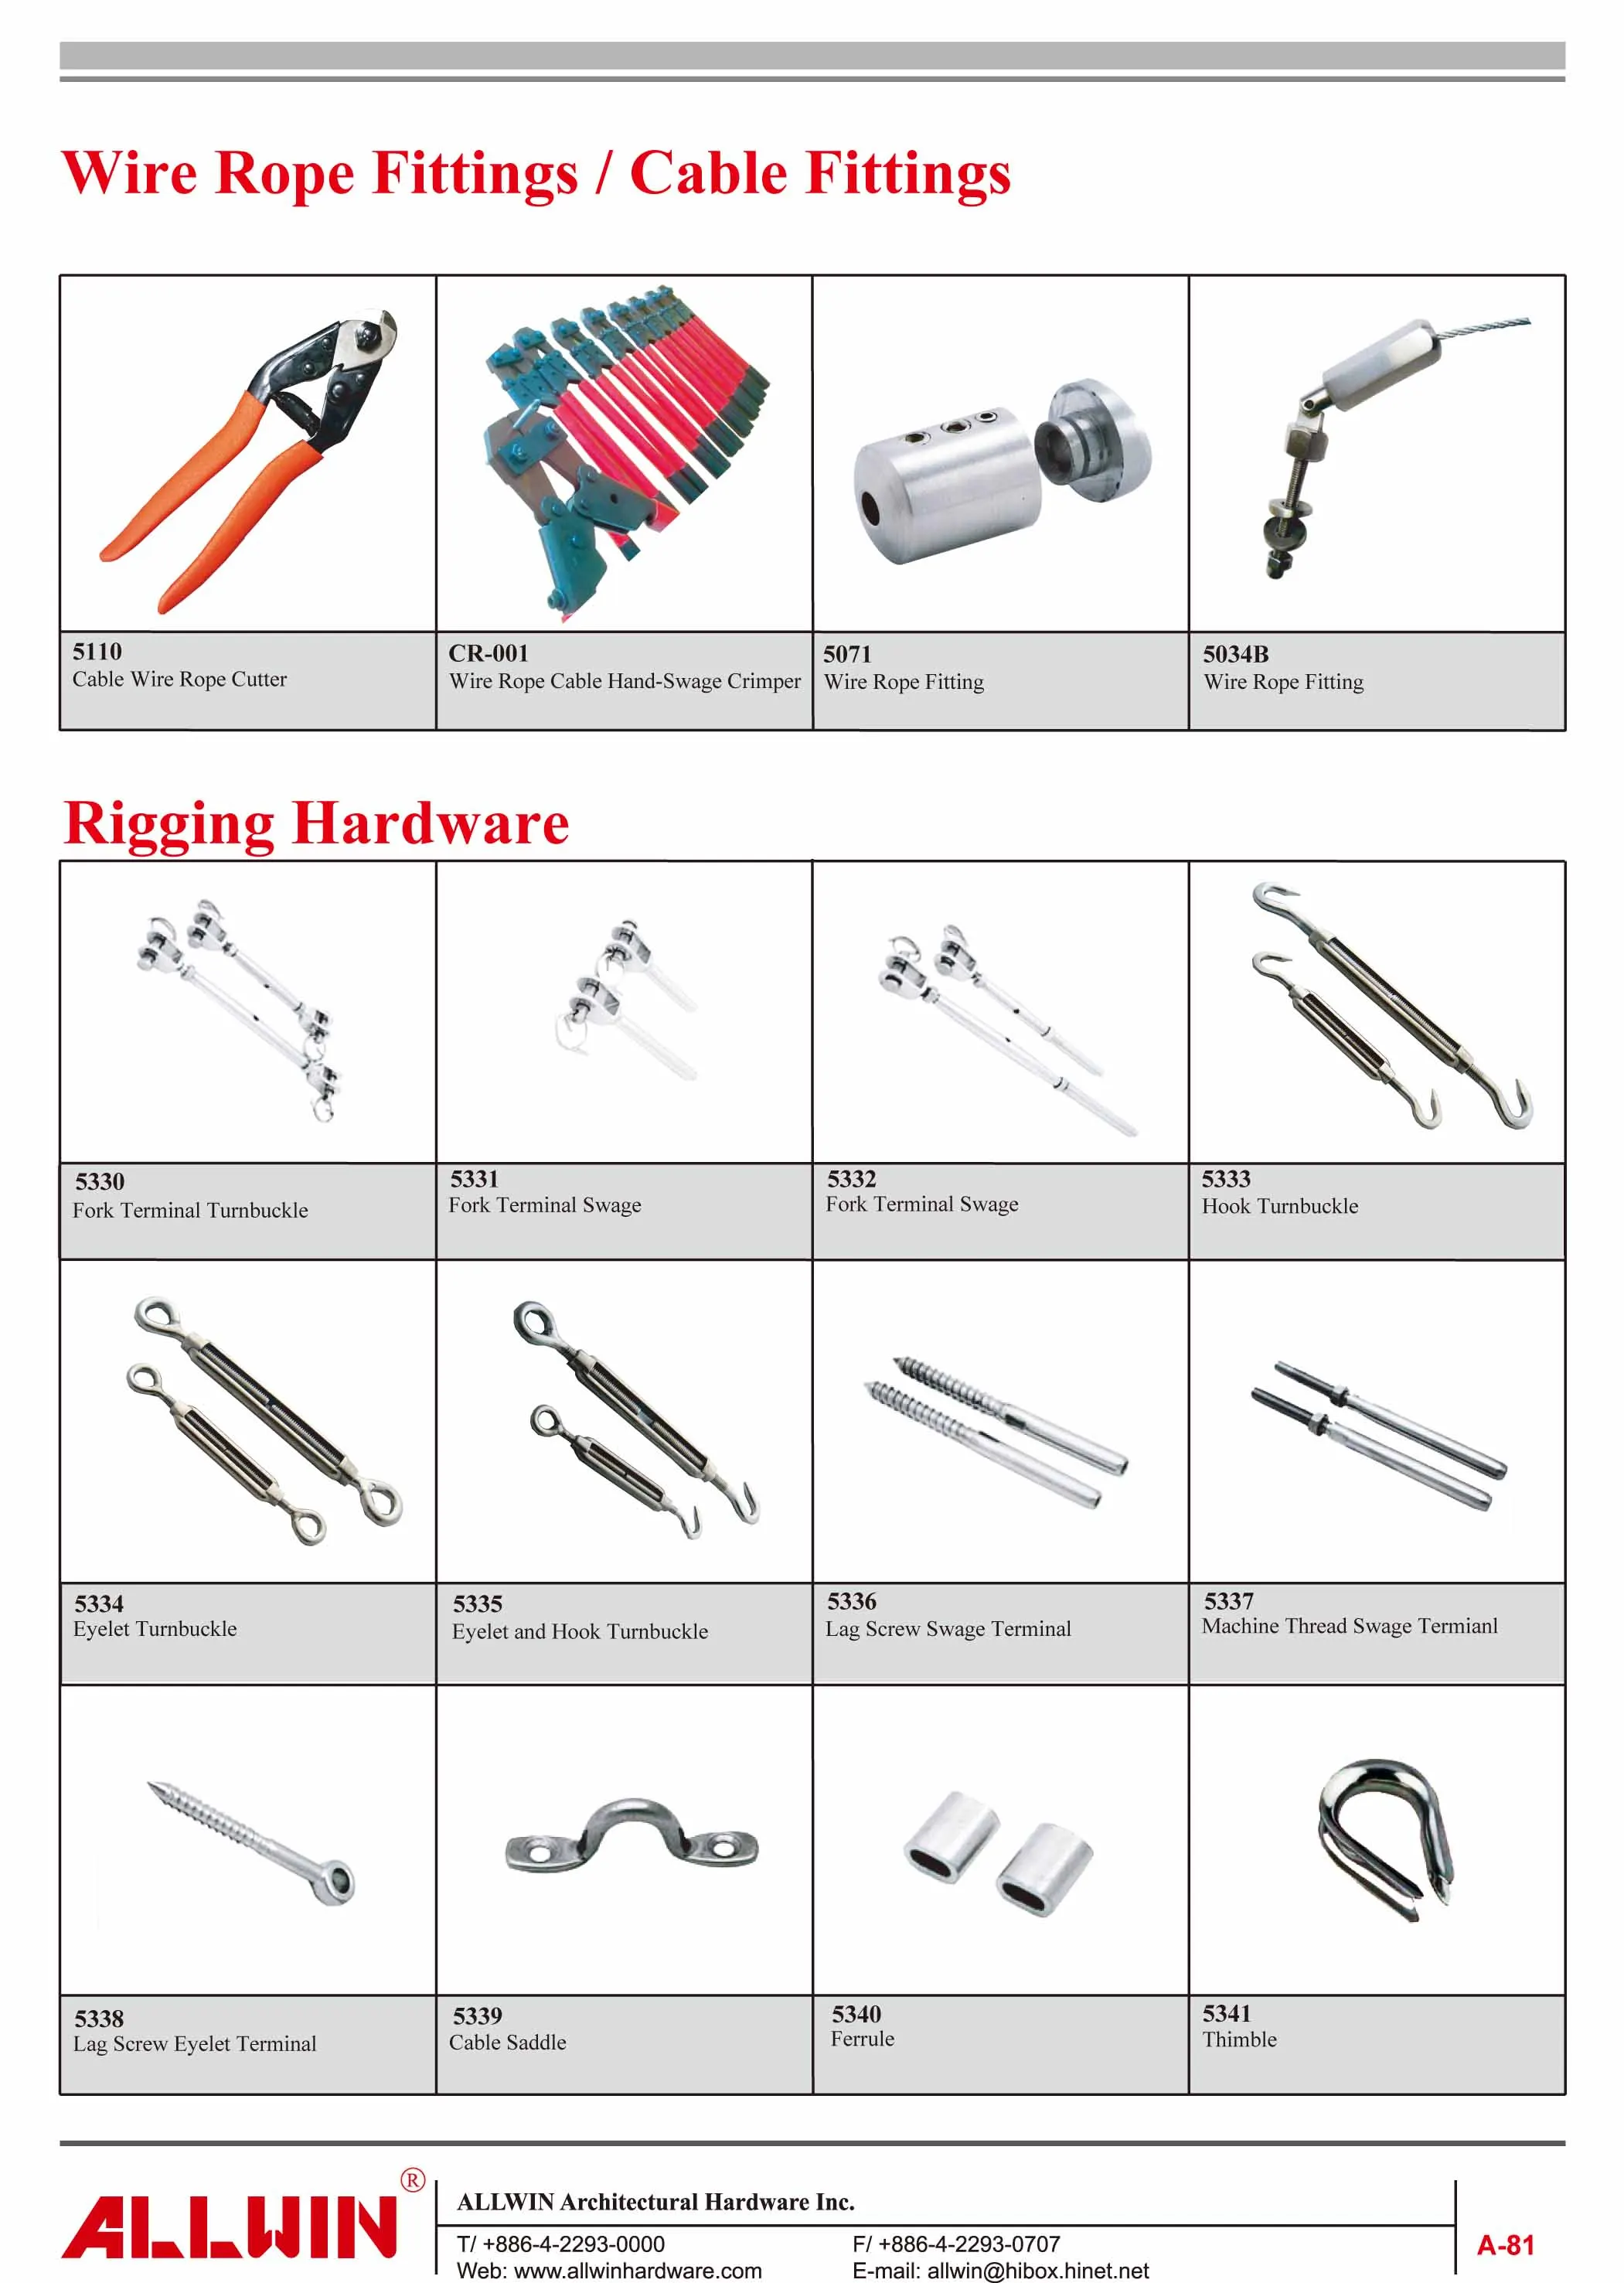 Stainless steel Rigging wire rope Frame turnbuckle